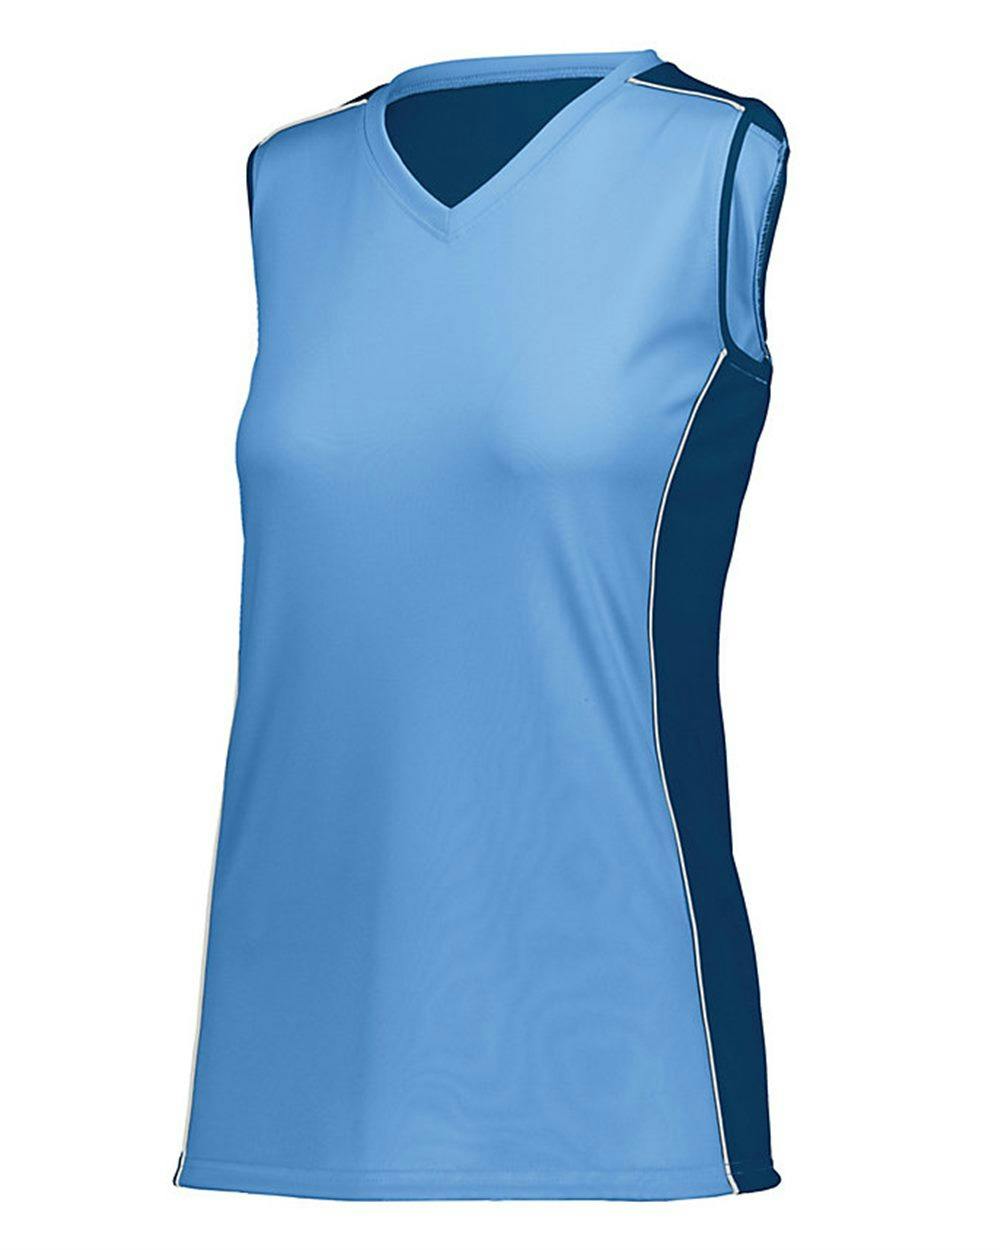 Image for Women's Paragon Jersey - 1676